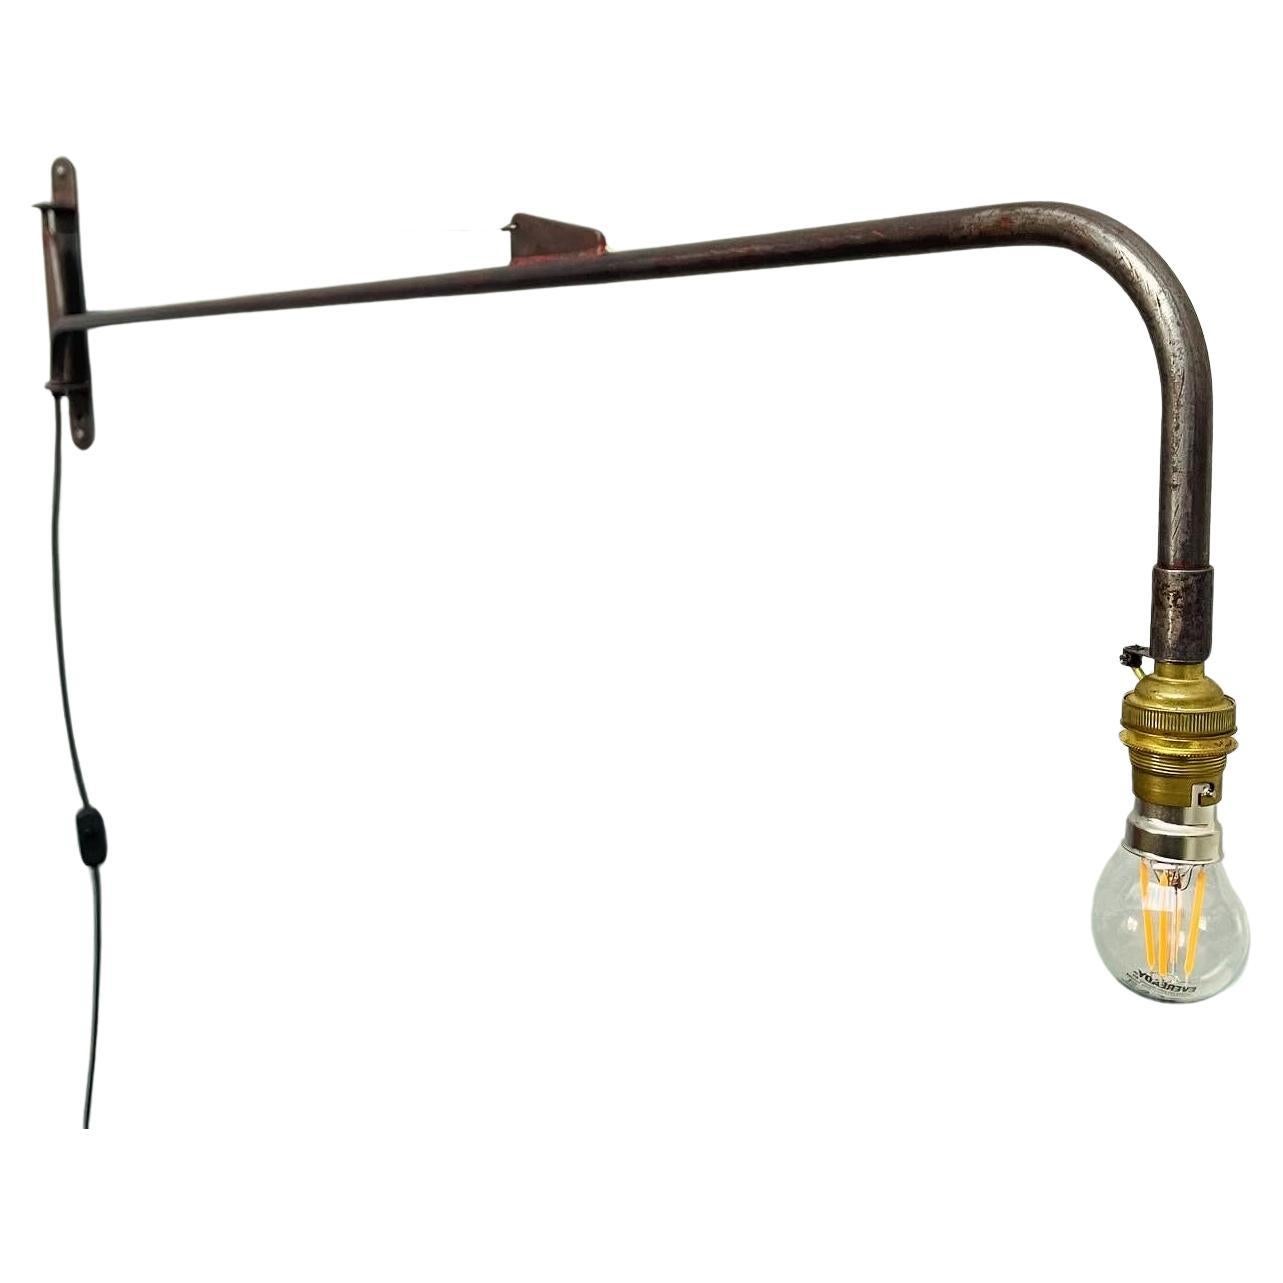 Iconic French Industrial Wall Lamp By Jean Prouve  For Sale